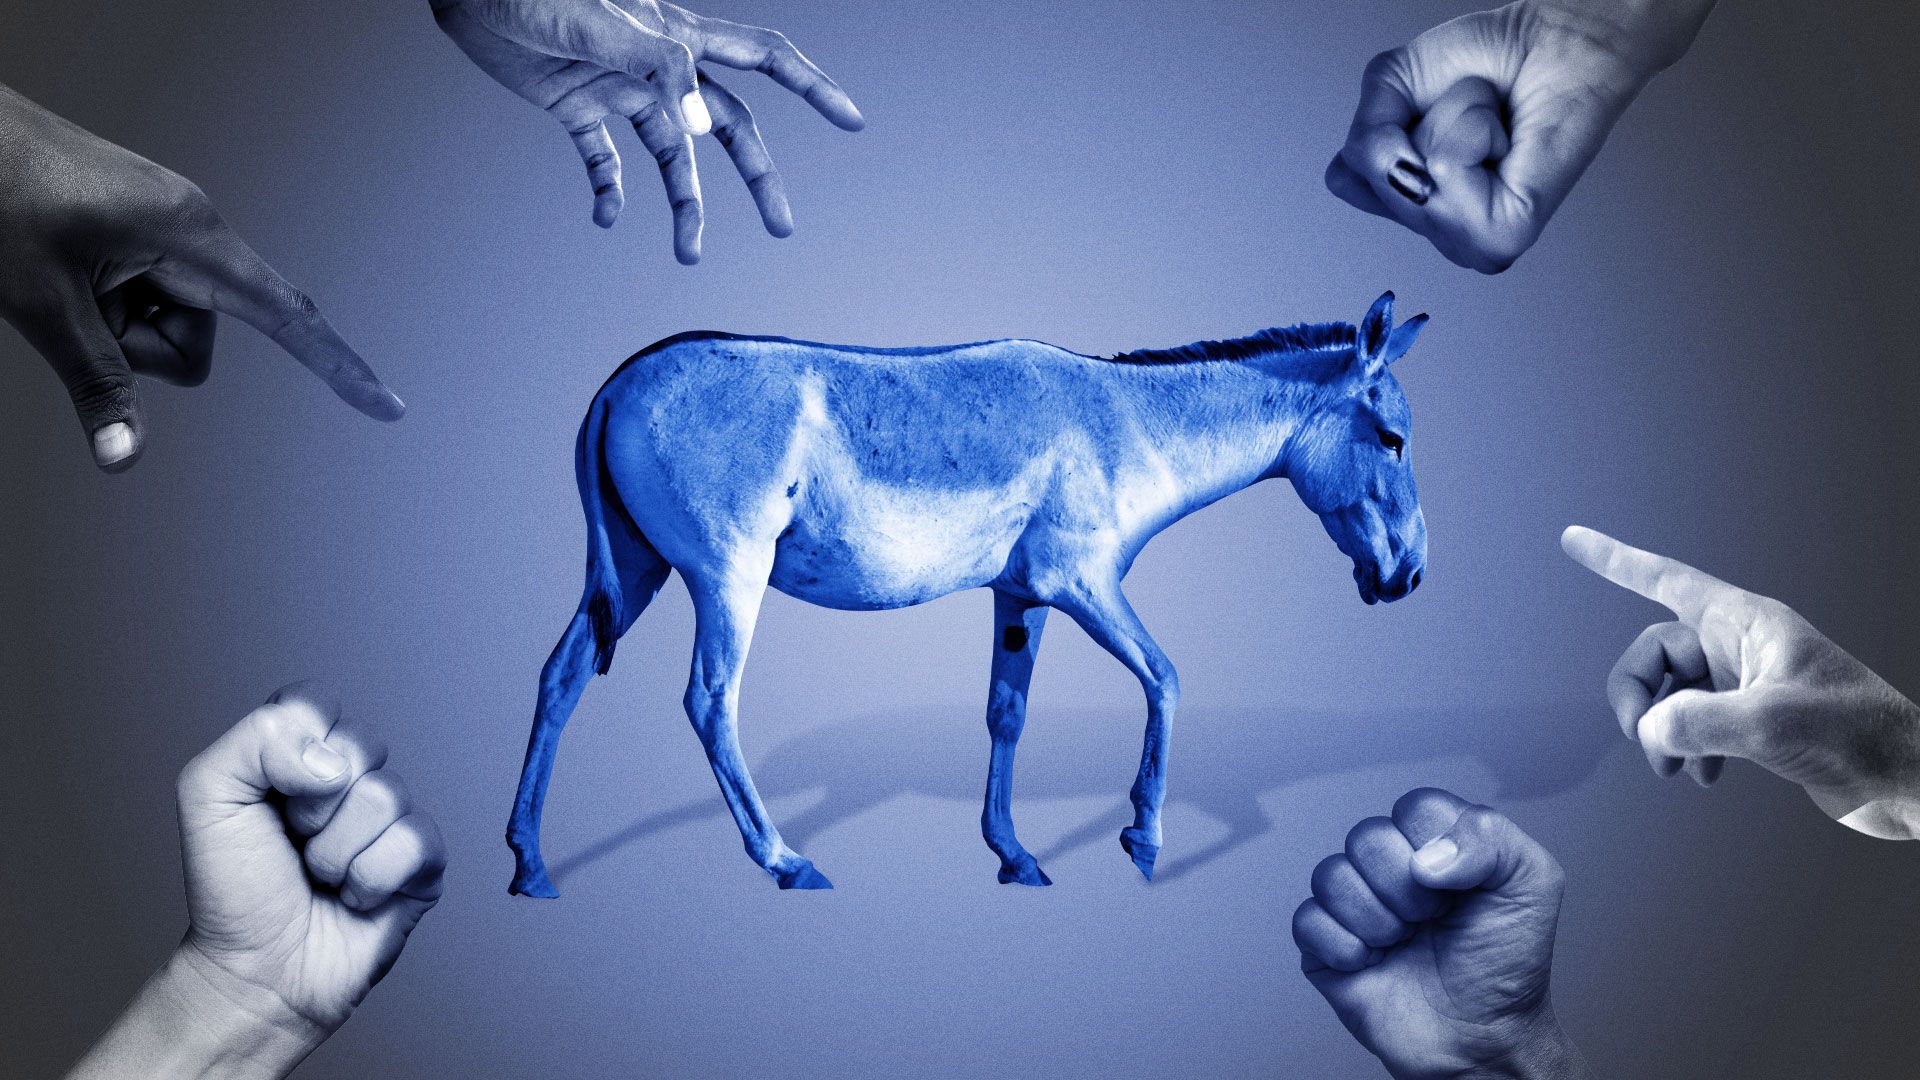 Illustration of diverse fists, reaching hands, and pointing fingers at a donkey